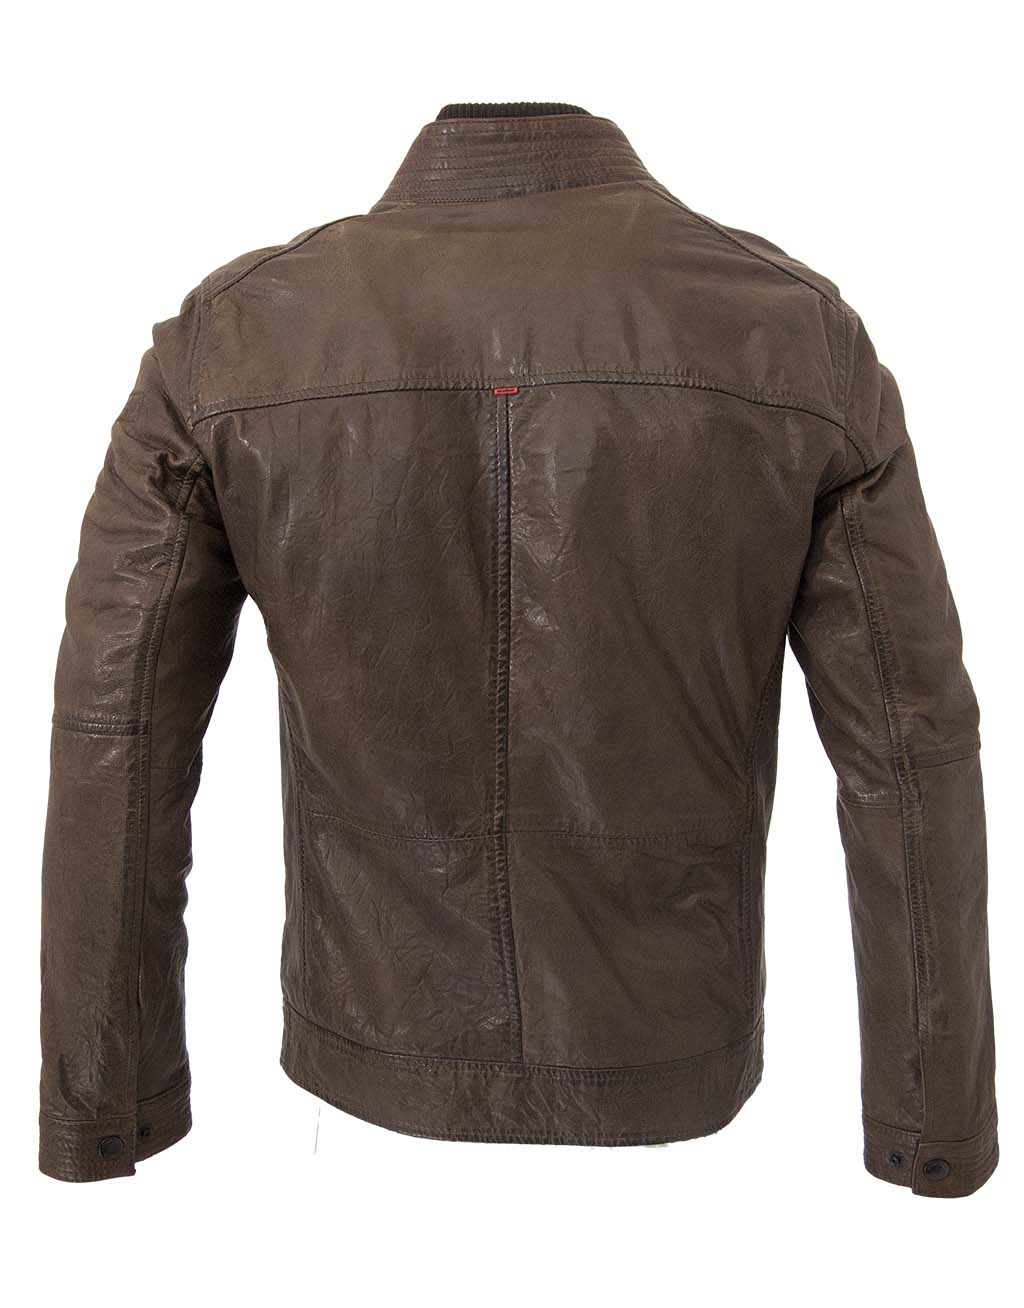 Strellson Moss 2 140018 Mens BROWN Leather Jacket. 100% Genuine leather ...